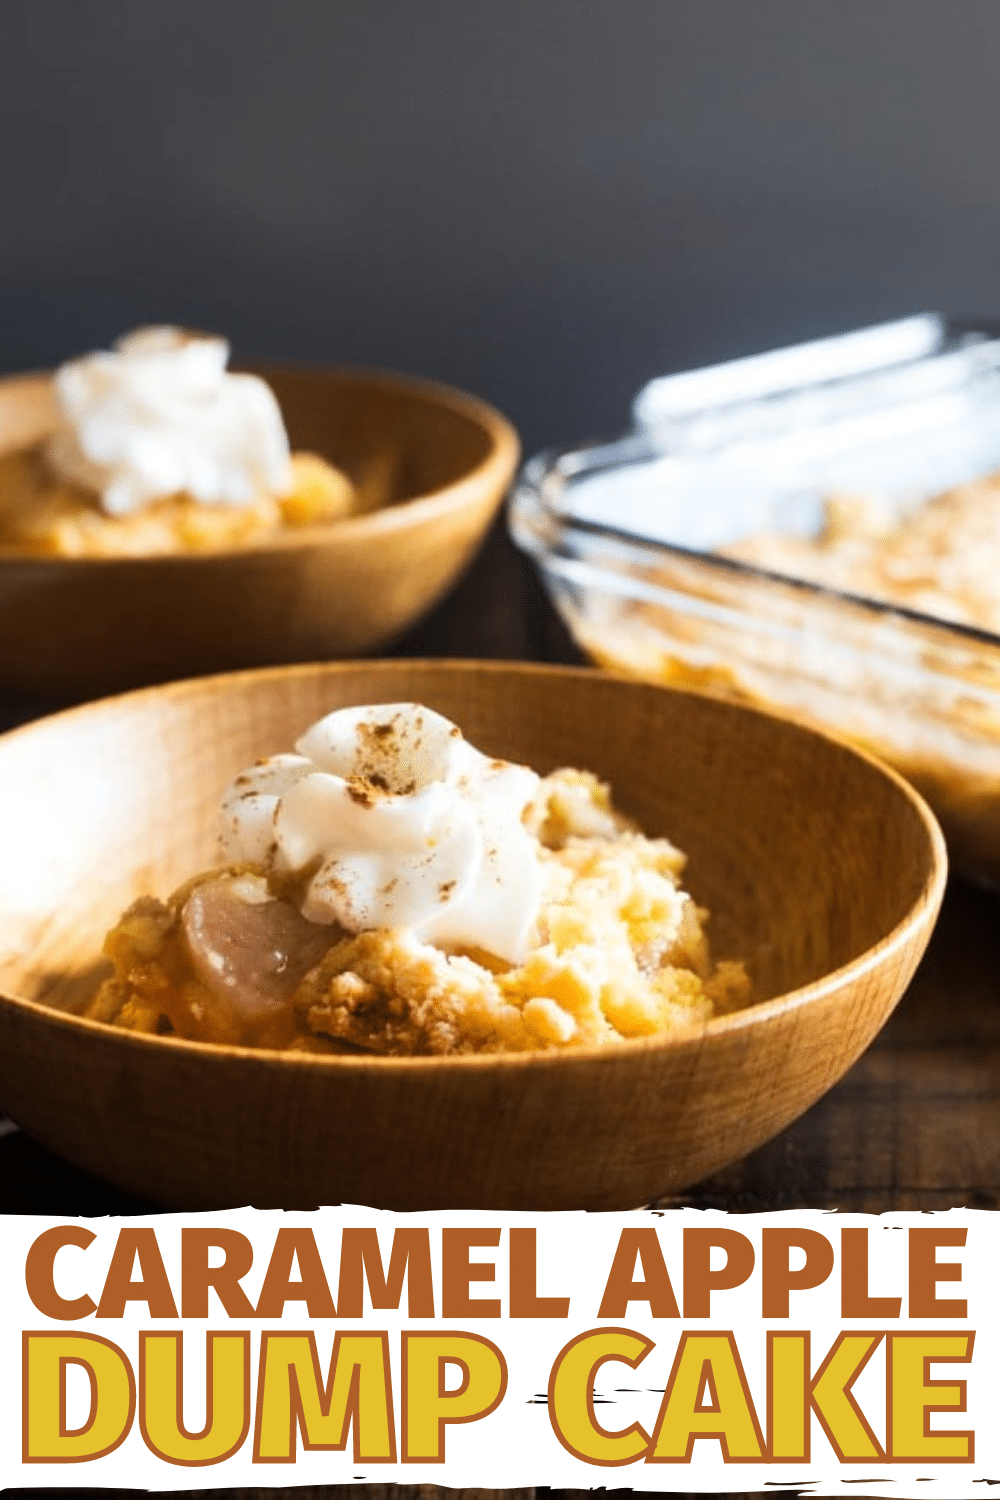 This caramel apple dump cake is a family favorite because it tastes amazing and only takes a few minutes to put together. Just 3 ingredients! #dumpcake #easydessert #caramelapple via @wondermomwannab